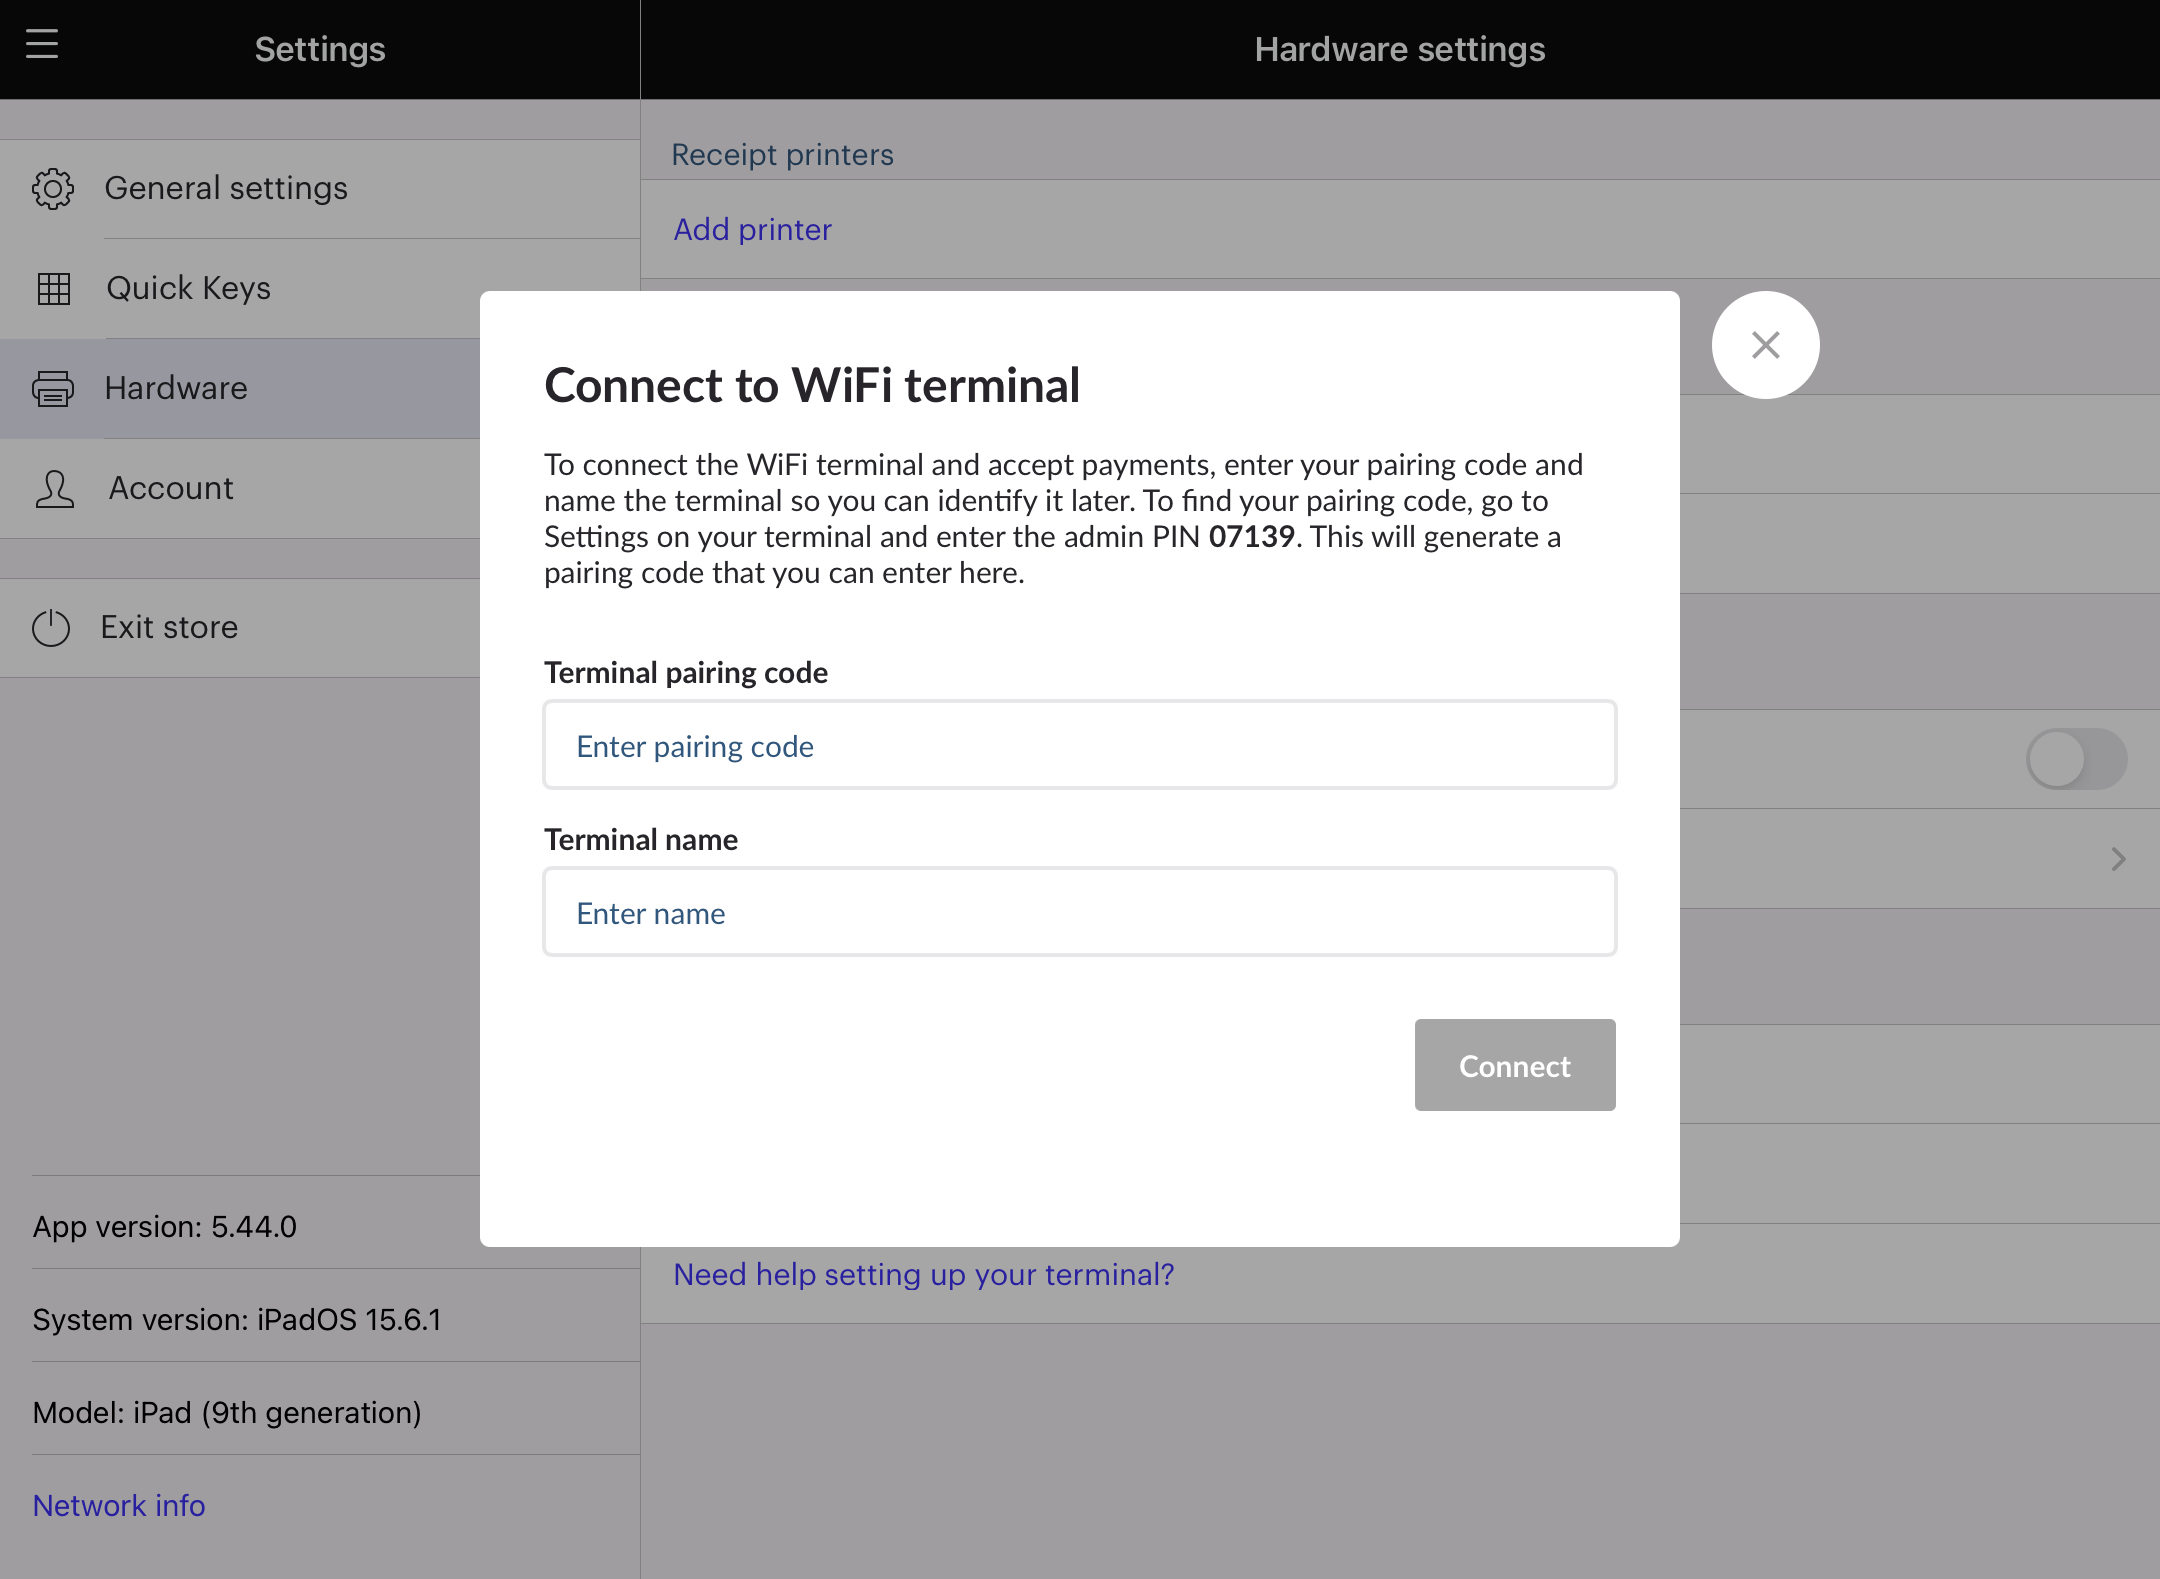 Connect to wifi terminal page with fields to enter terminal pairing code and terminal name.